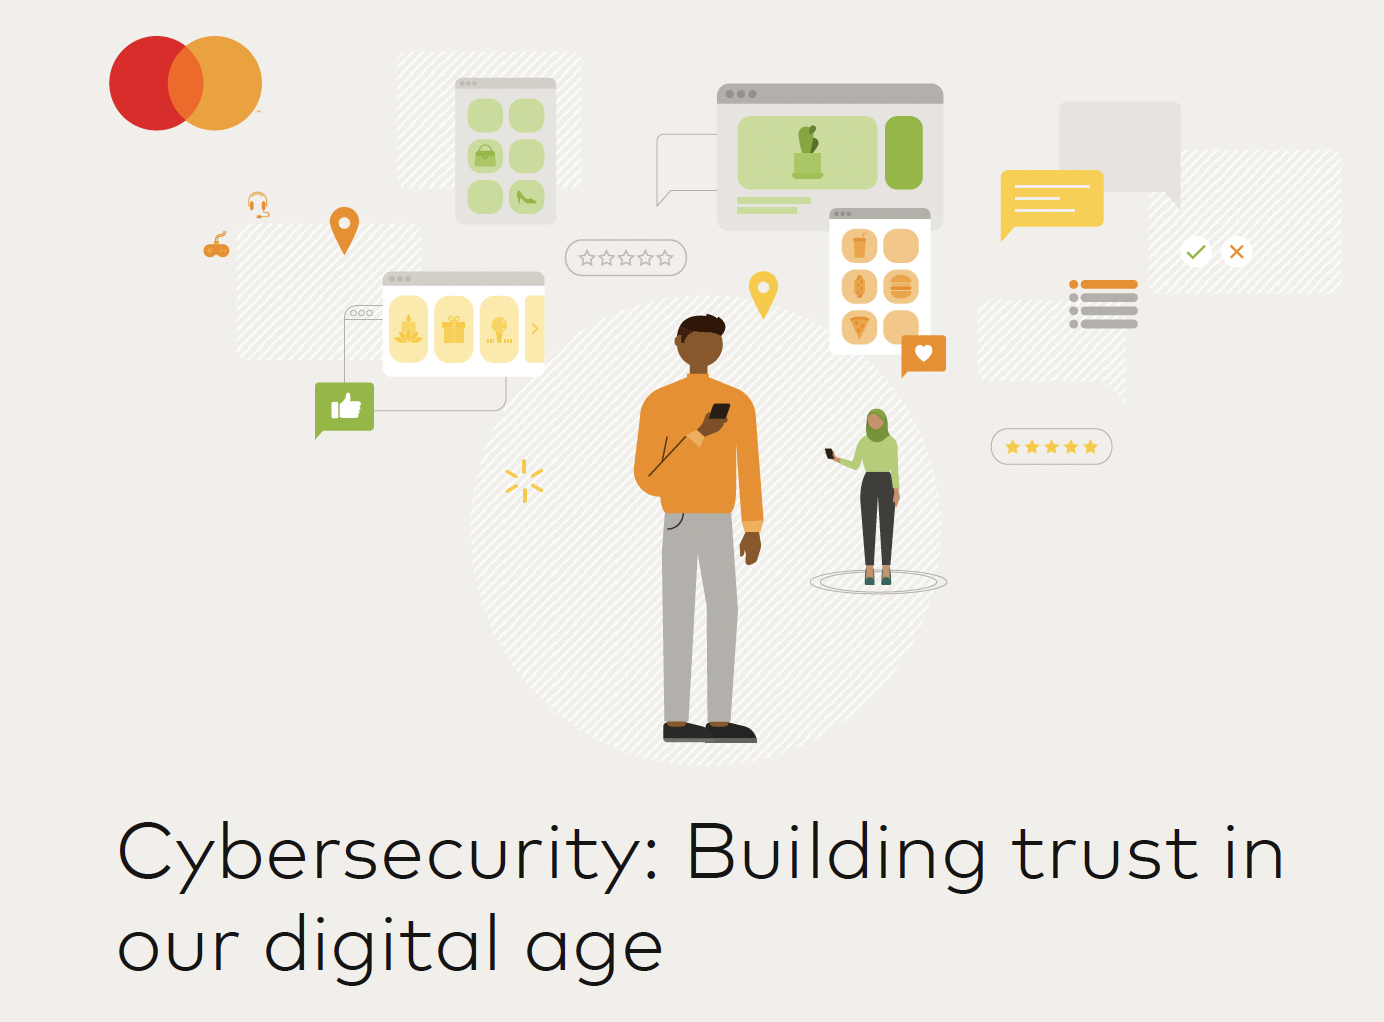 Cybersecurity: Investing to secure our digital age